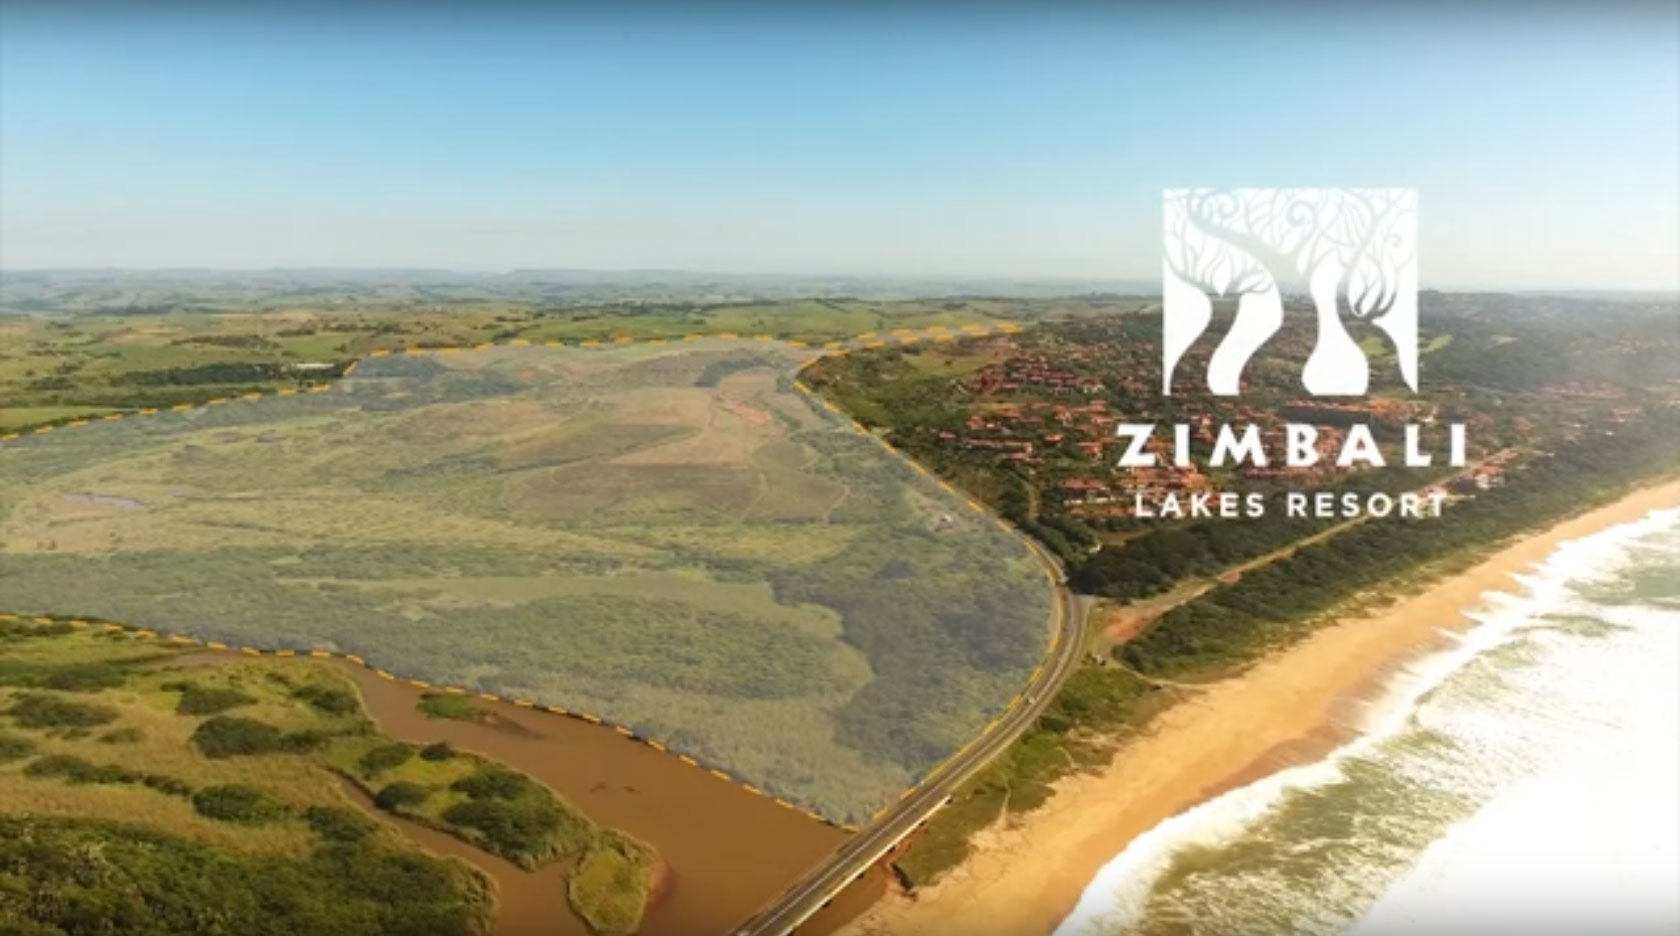 Estate Living discusses opportunities for development at the gorgeous Zimbali Lakes Resort